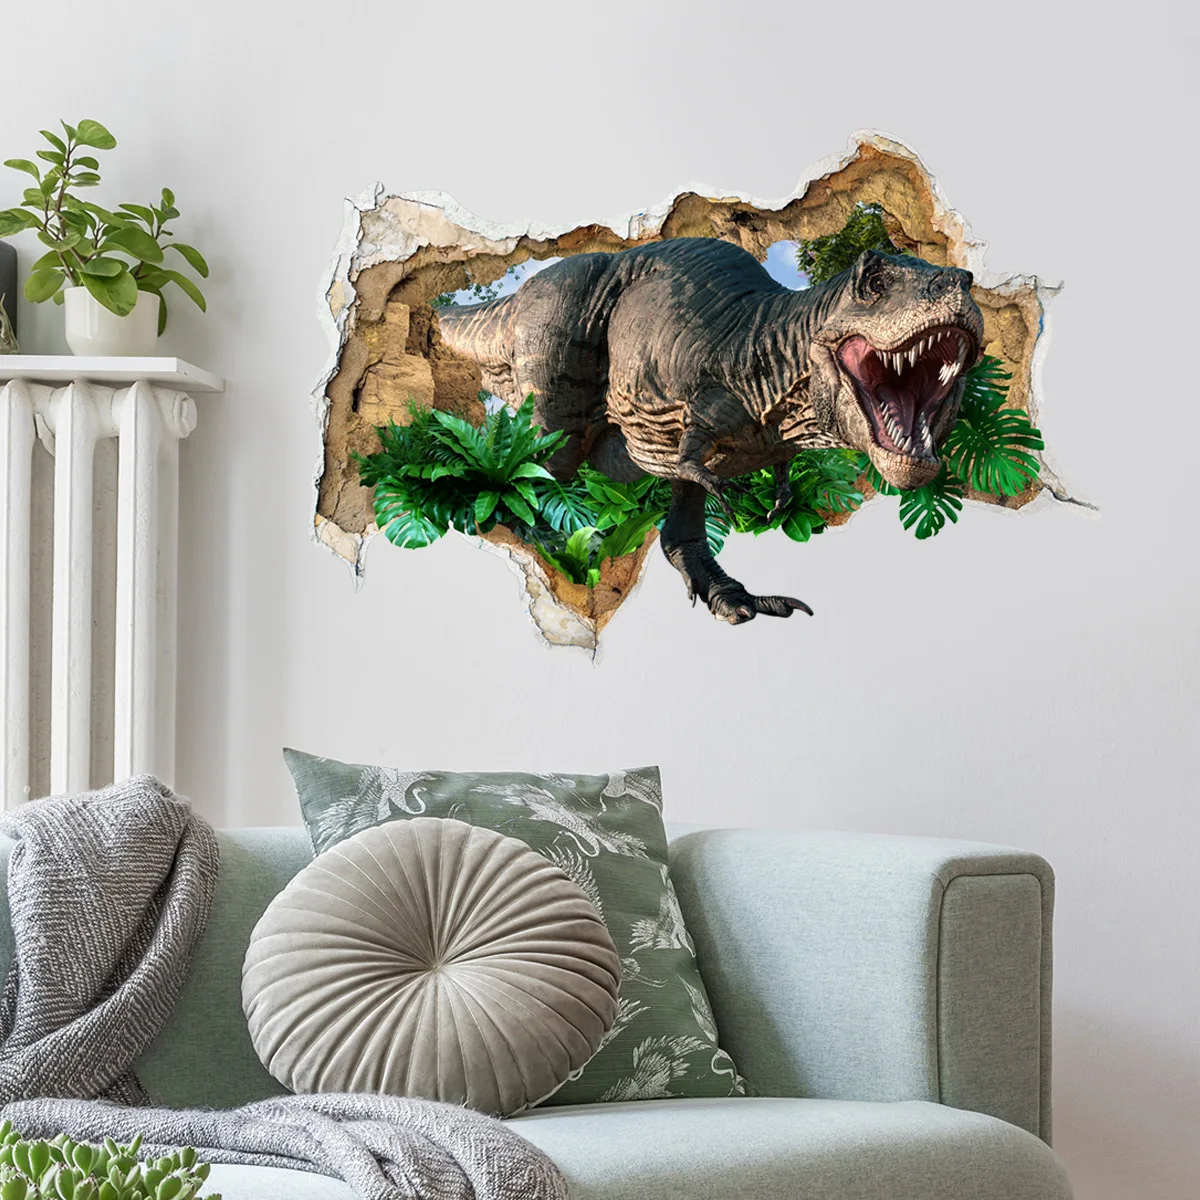 40*60cm Broken Wall Dinosaur Decorative Painting Wall Stickers Background Wall Home Decoration Wall Stickers Wallpaper Atw6009 10 pcs sponge brush with wooden handle decoration for home holder wallpaper bedroom